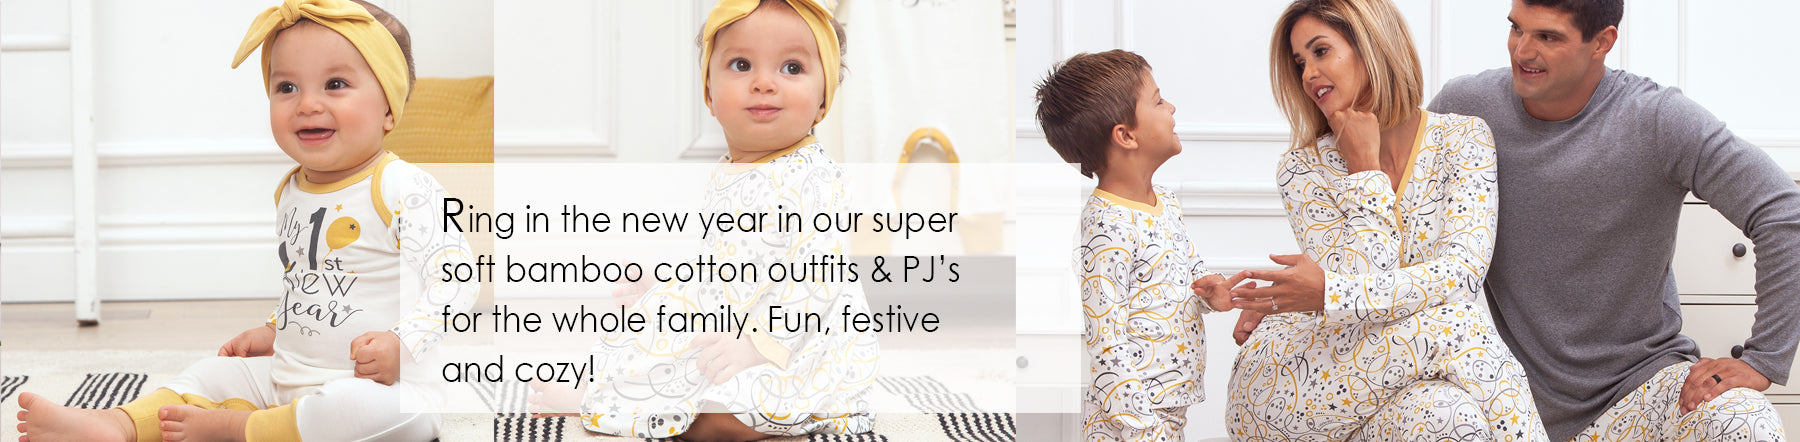 New Year family loungewear and outfits in bamboo